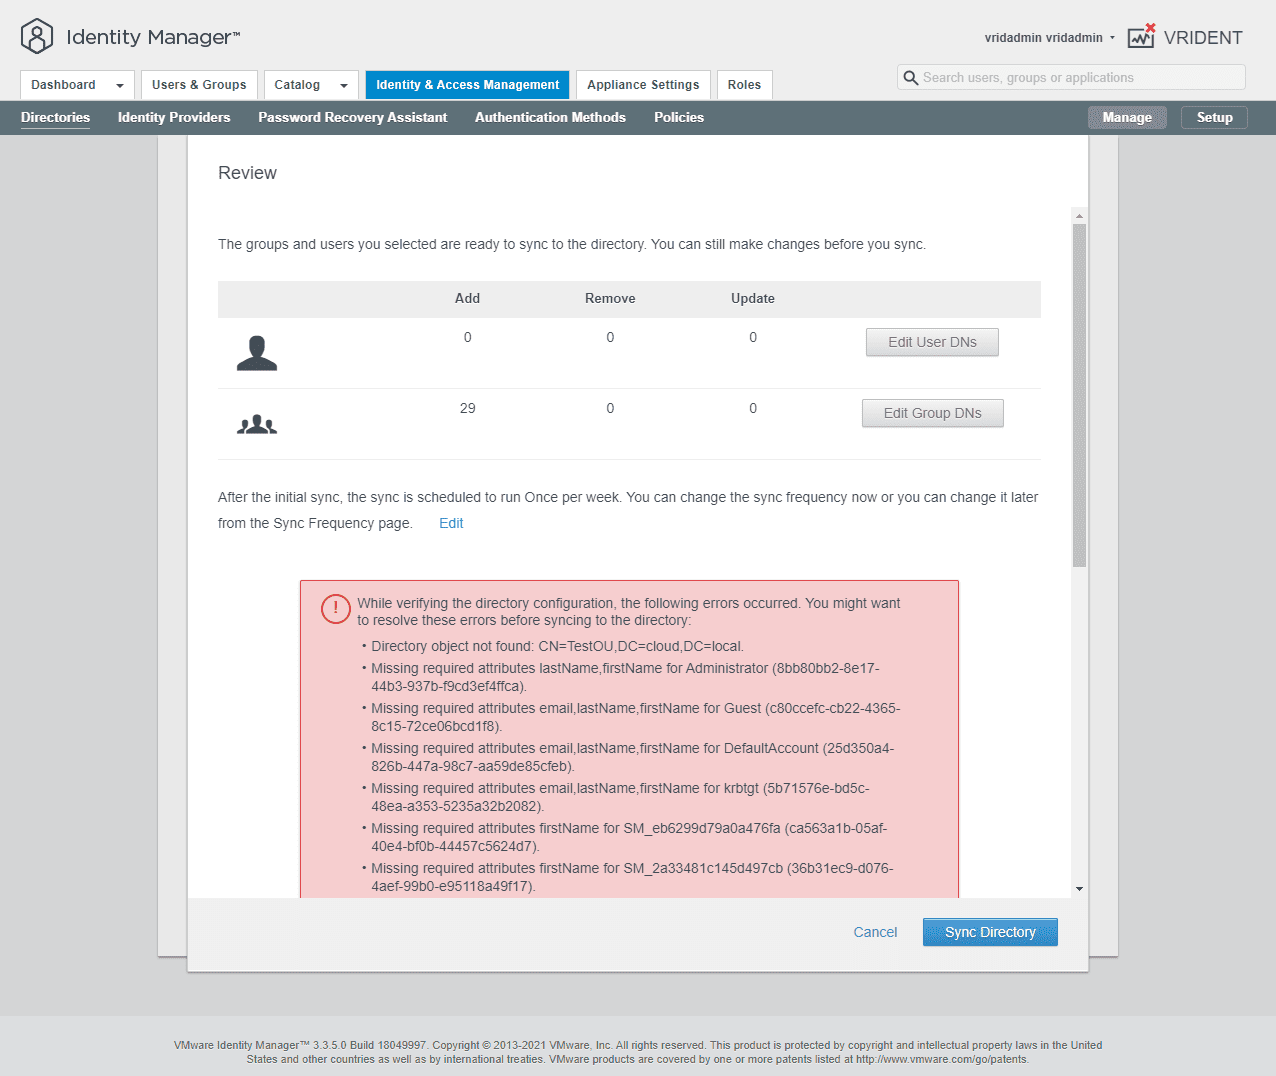 Errors related to required VMware Identity Manager attributes